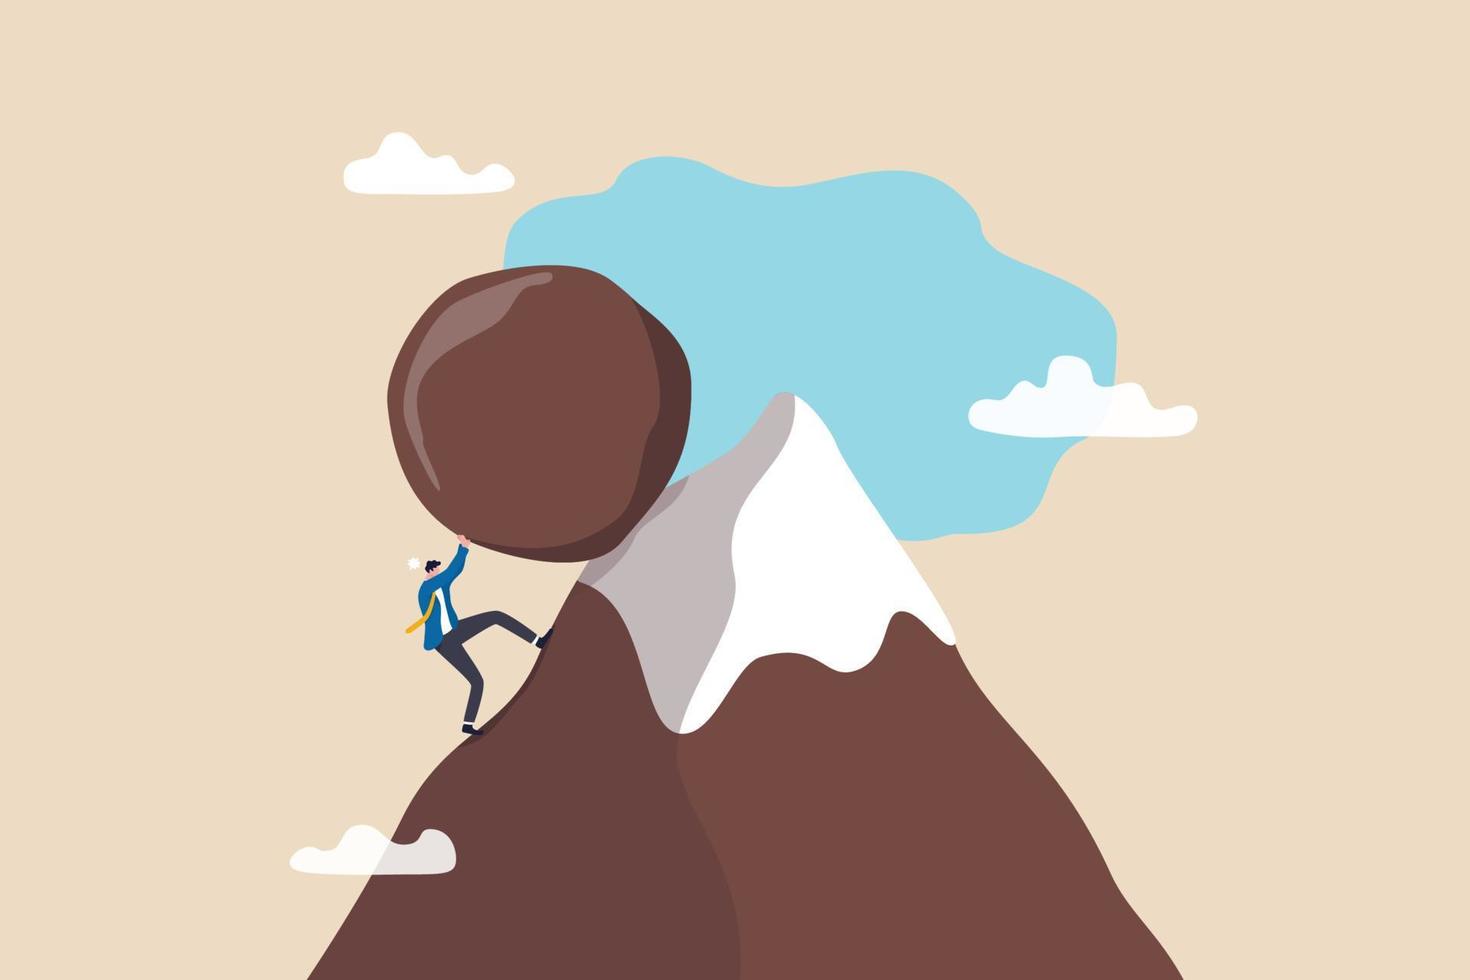 Hard work like pushing boulder uphill, burden or obstacle, business difficulty, struggle, challenge to success, motivation or persistence concept, businessman pushing boulder uphill to mountain peak. vector